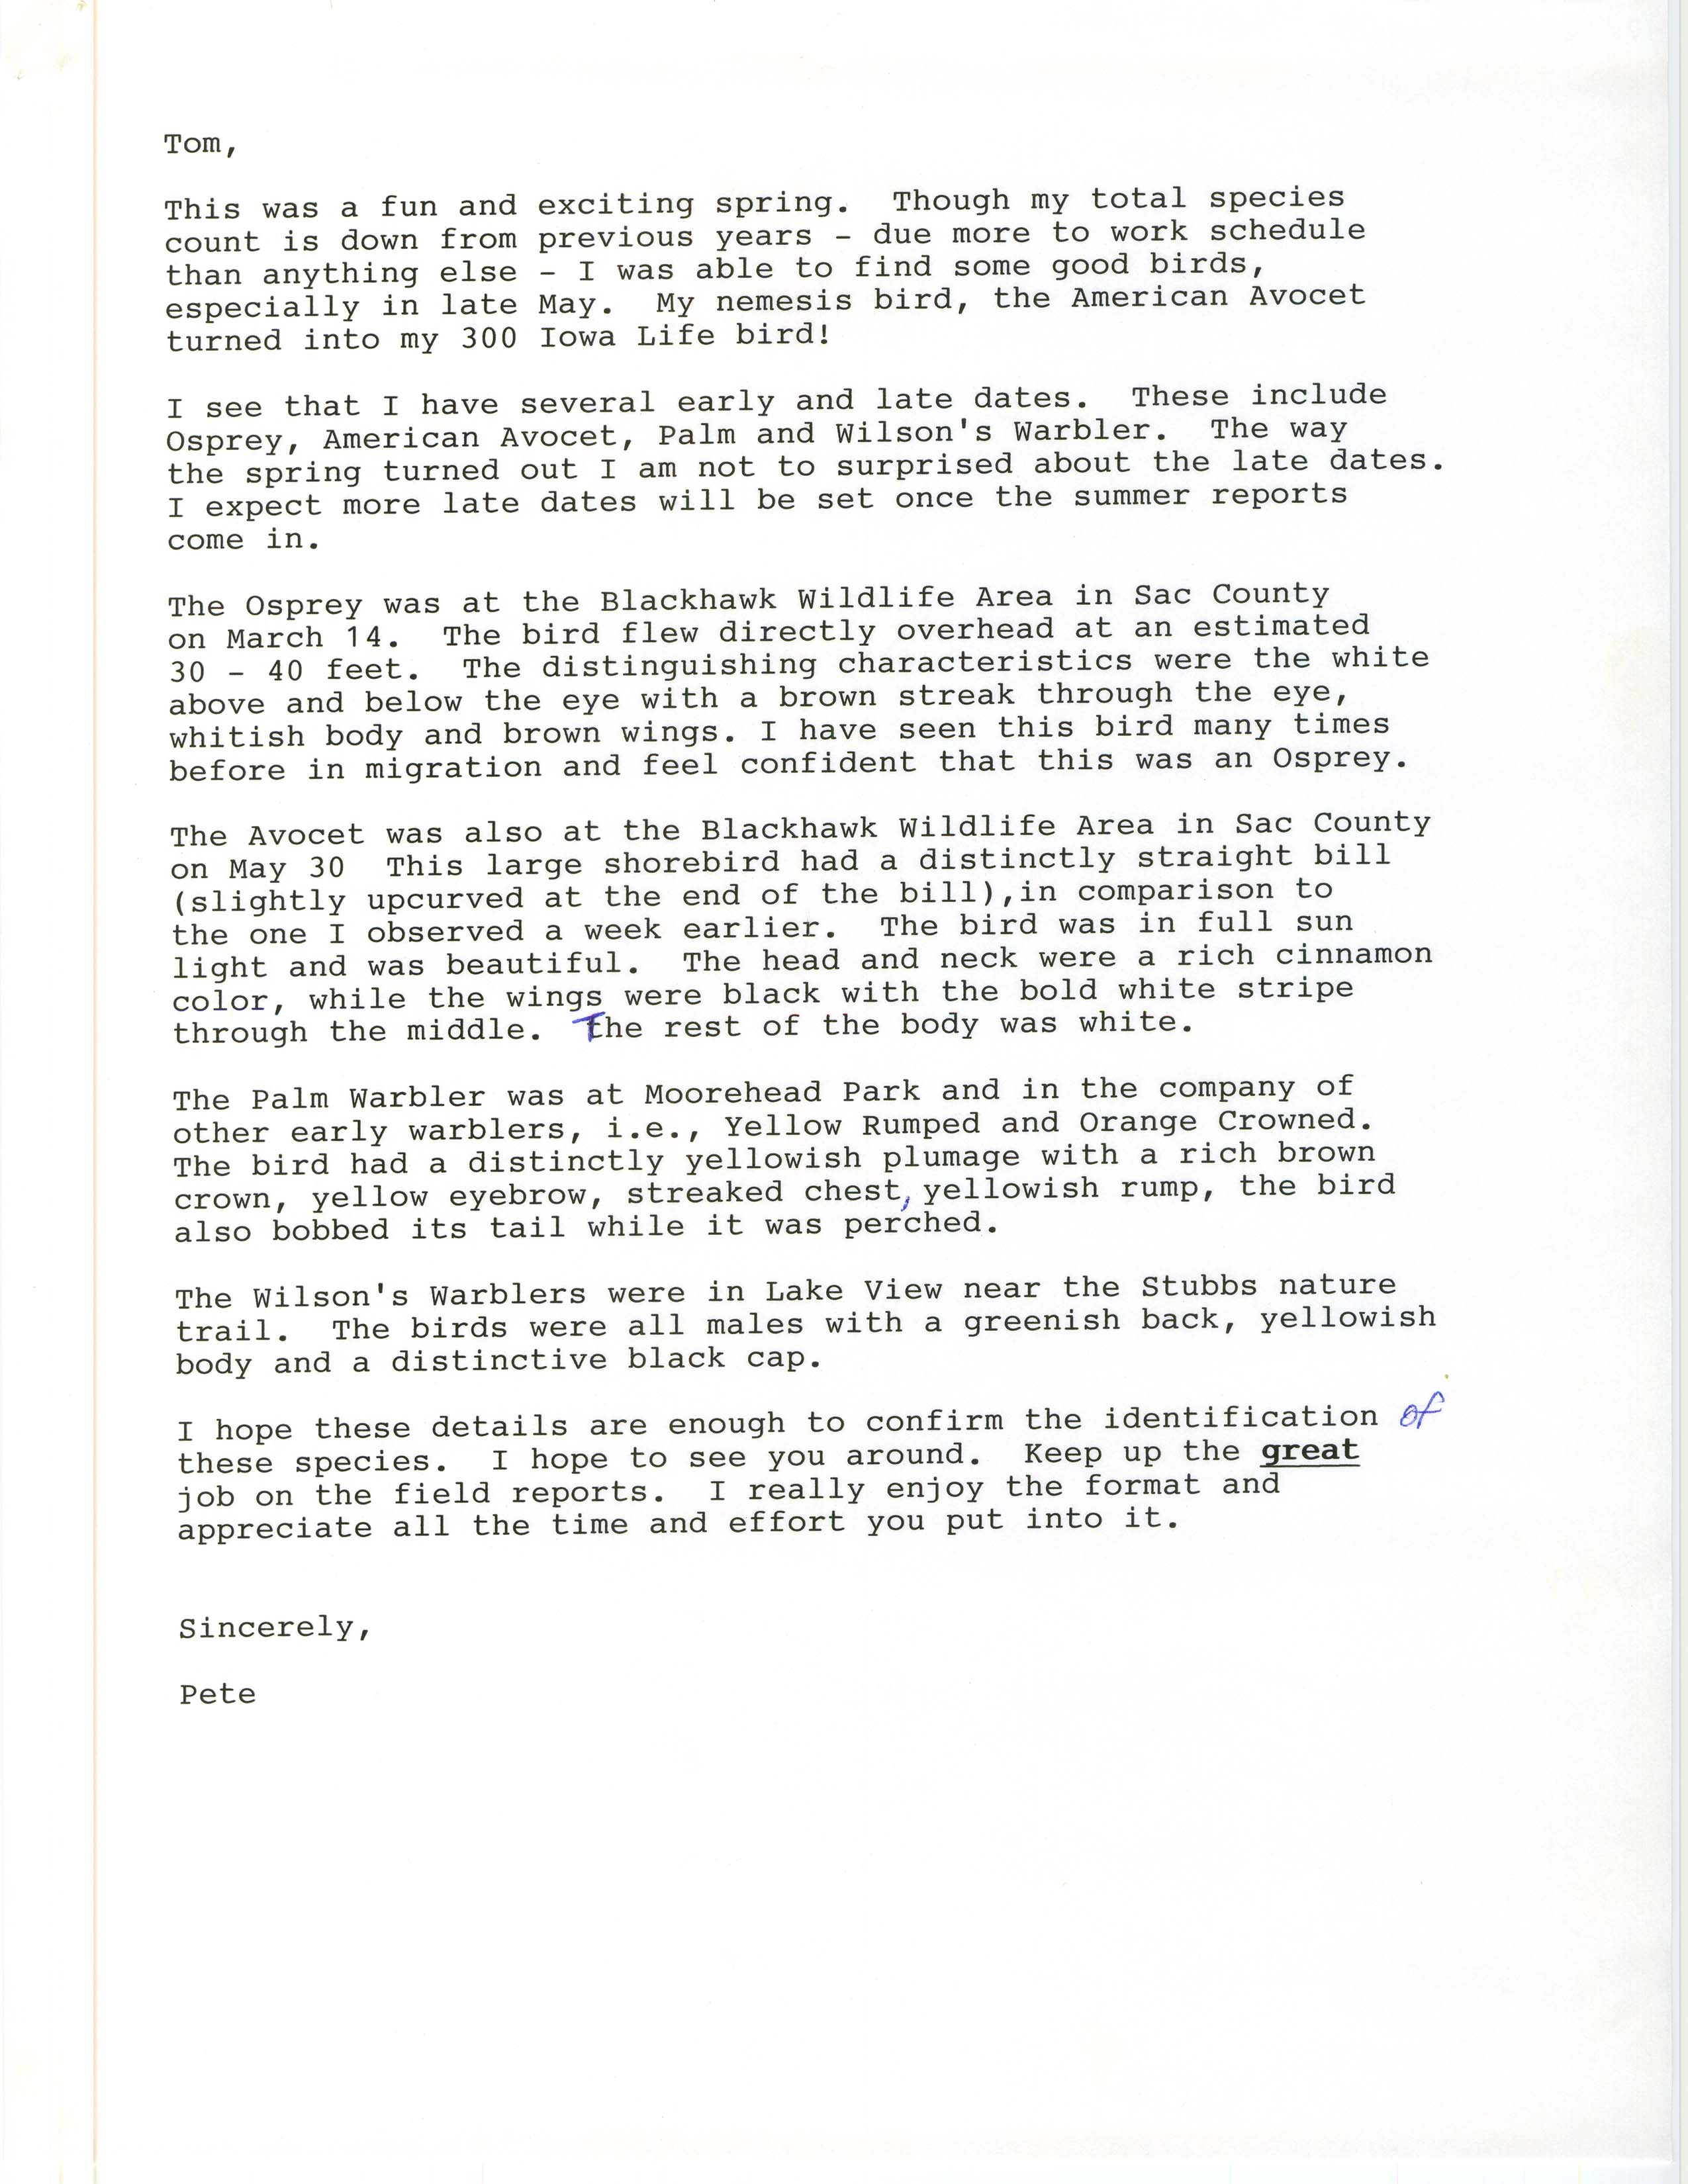 Field notes and Peter Ernzen letter to Thomas H. Kent, spring 1997